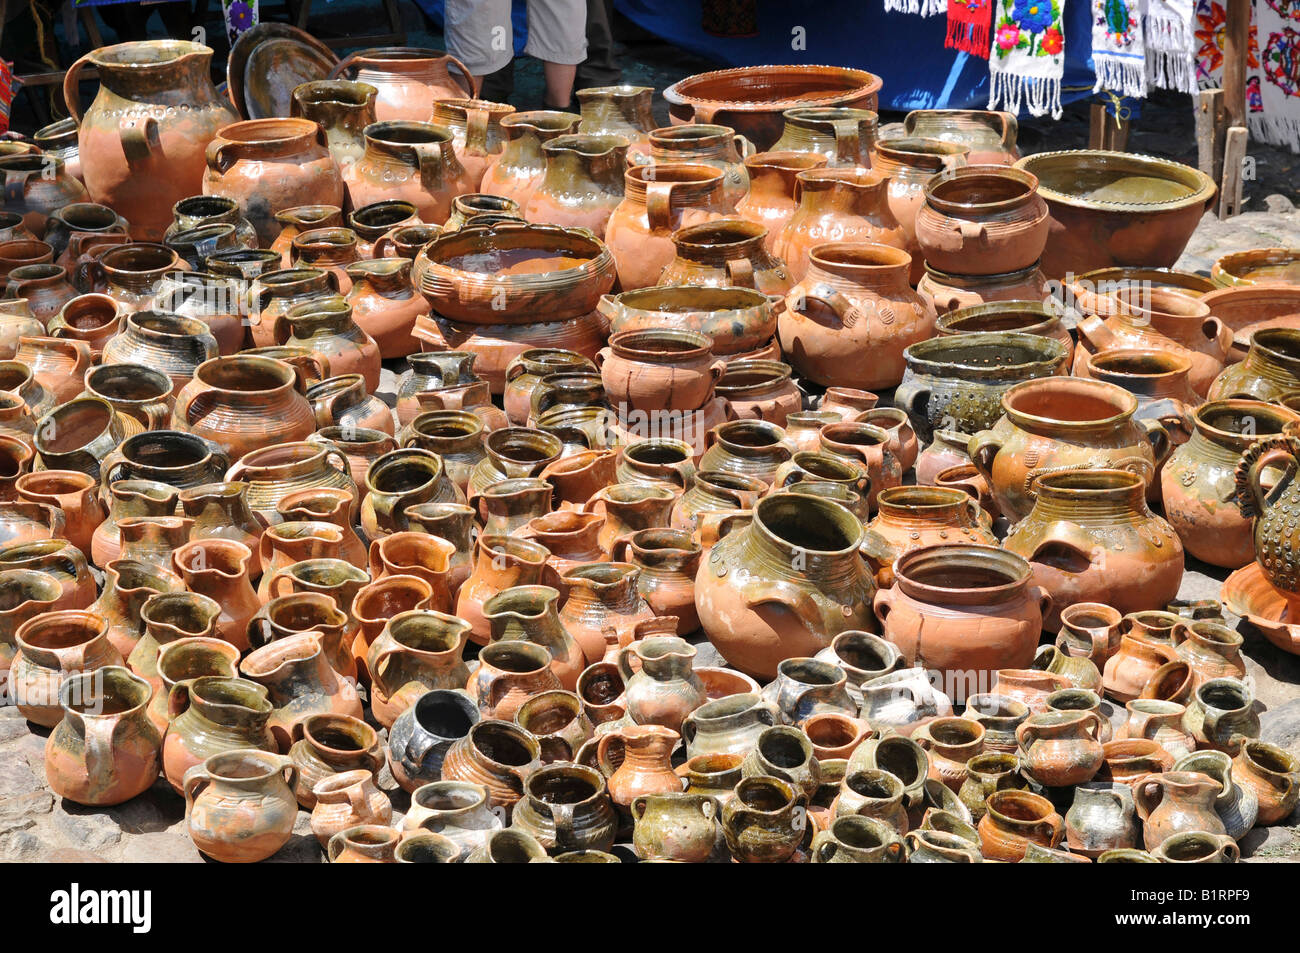 Clay pots sold at a street market in Chichicastenango, Guatemala, Central America Stock Photo